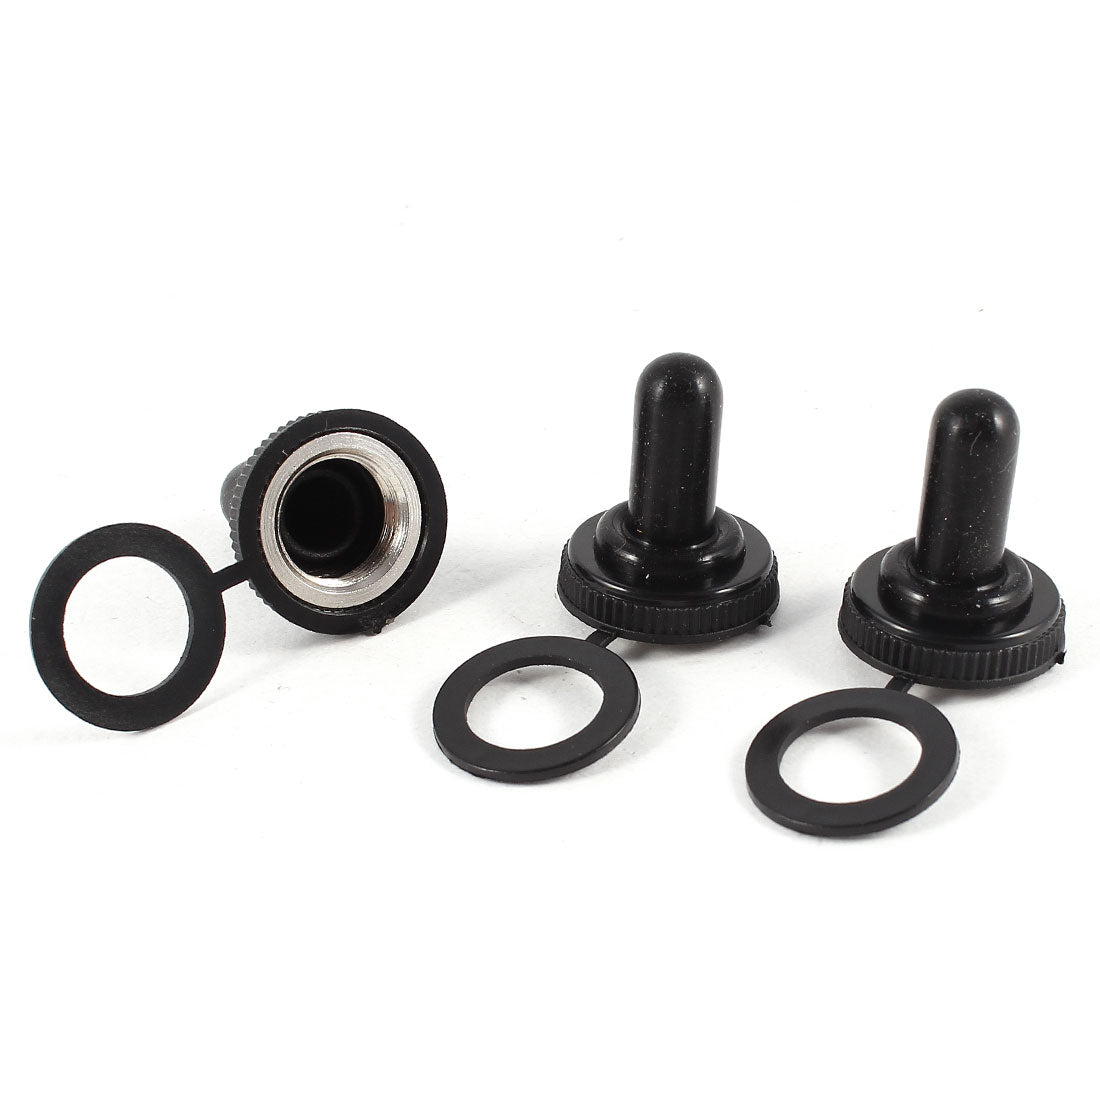 uxcell Uxcell 3 Pcs 12mm Waterproof Rubber Toggle Switch Protect Covers Caps Seal